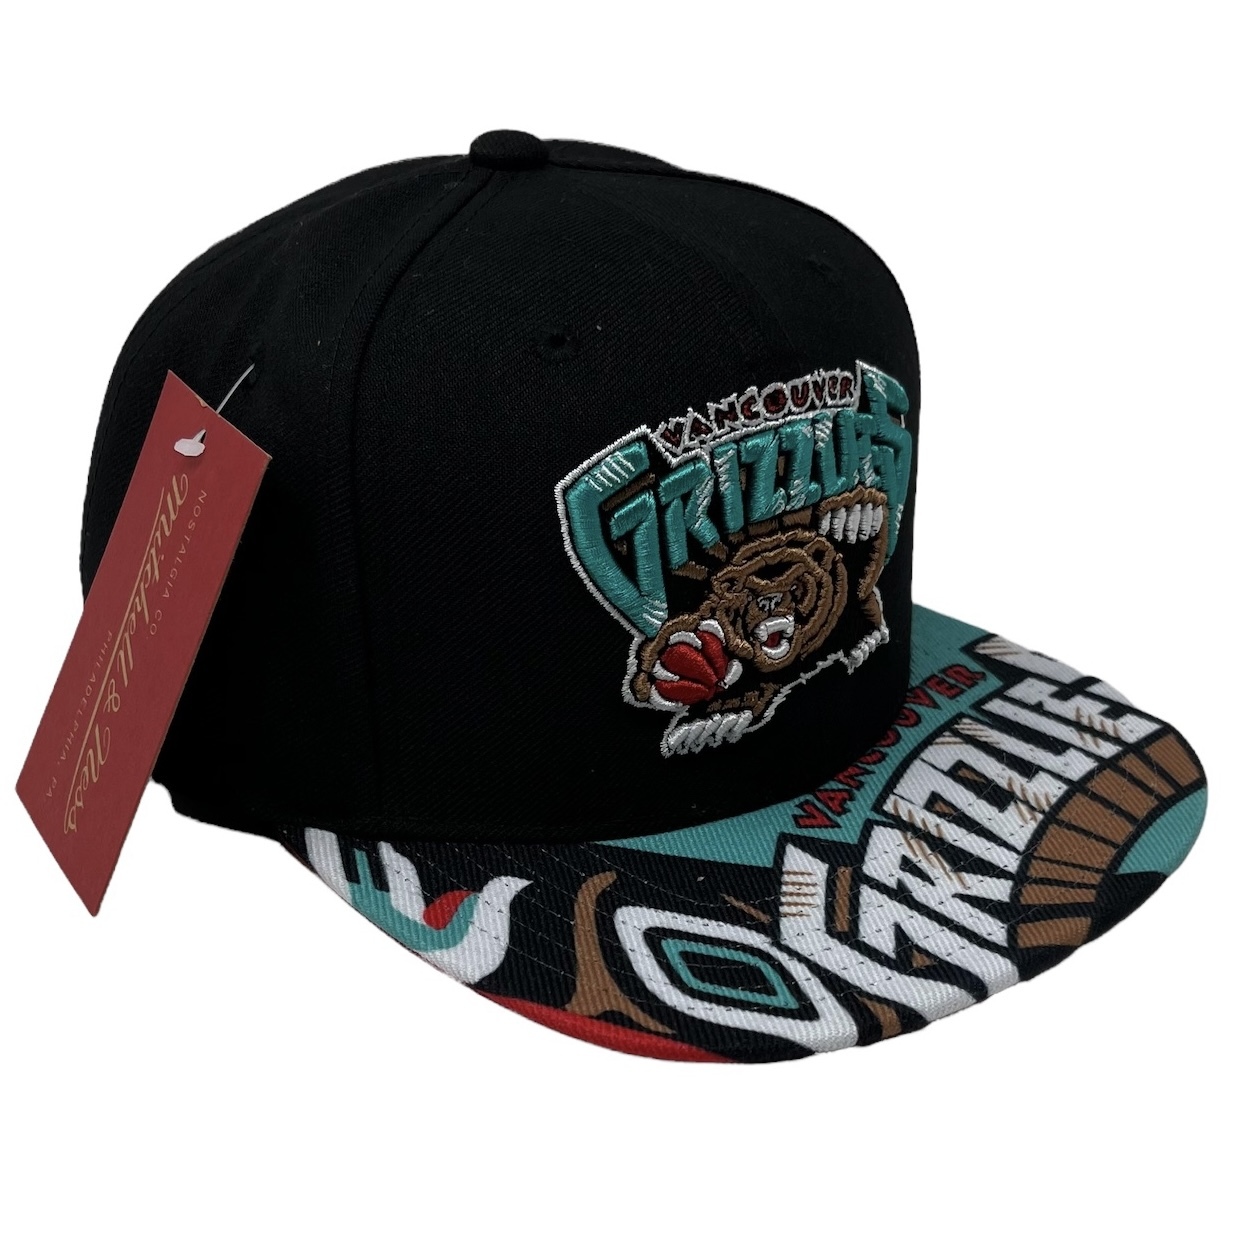 Mitchell & Ness Men's Mitchell & Ness White Vancouver Grizzlies Canada Day  Package Snapback Adjustable Hat